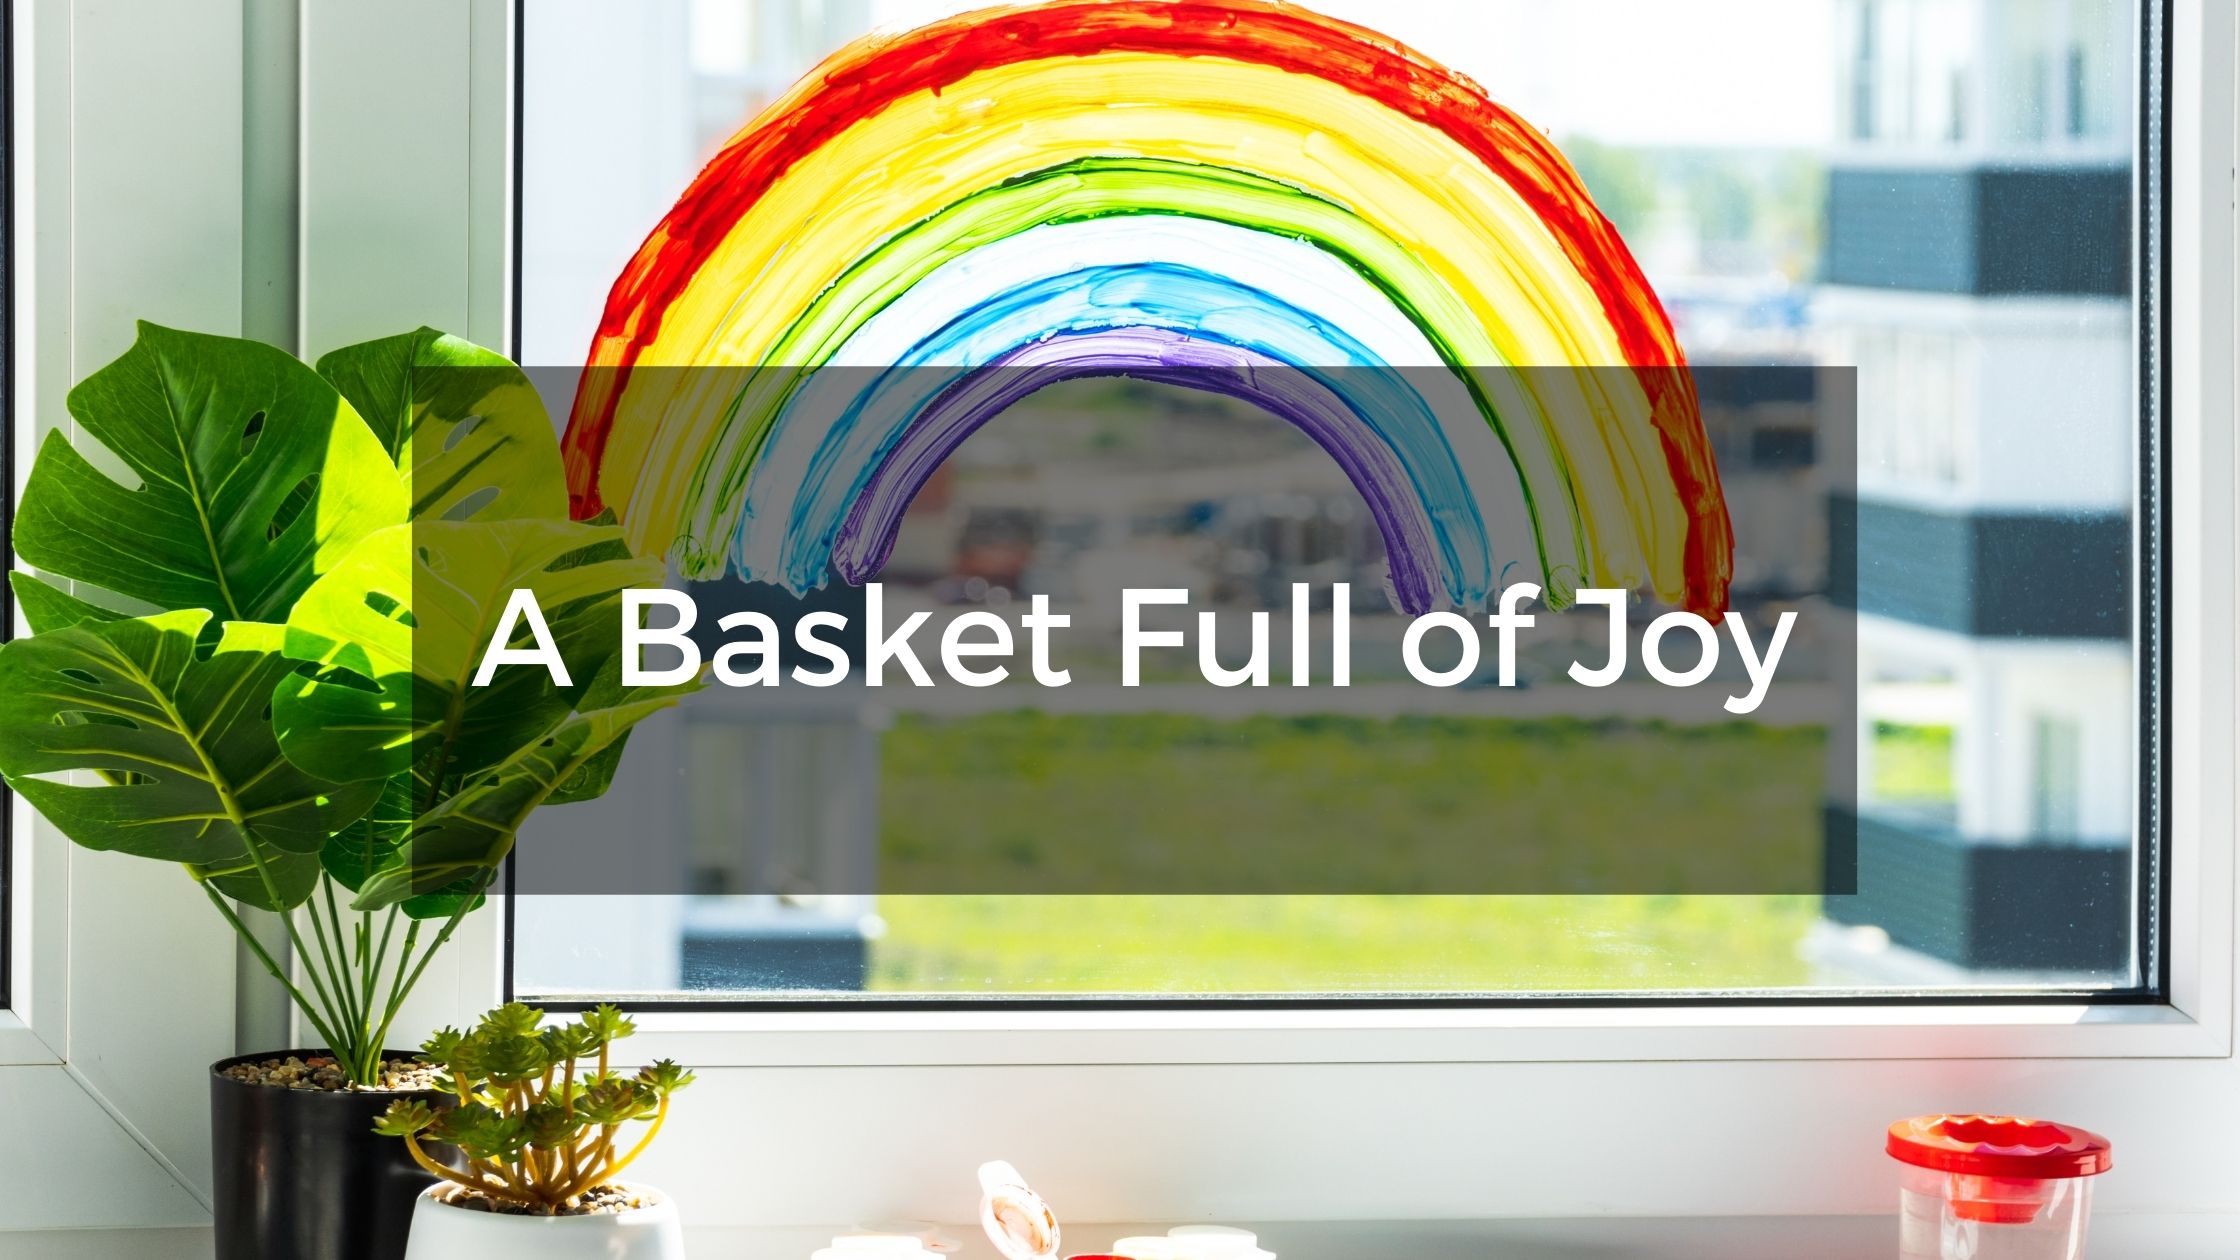 A Basket Full of Joy - When We All Need it Most